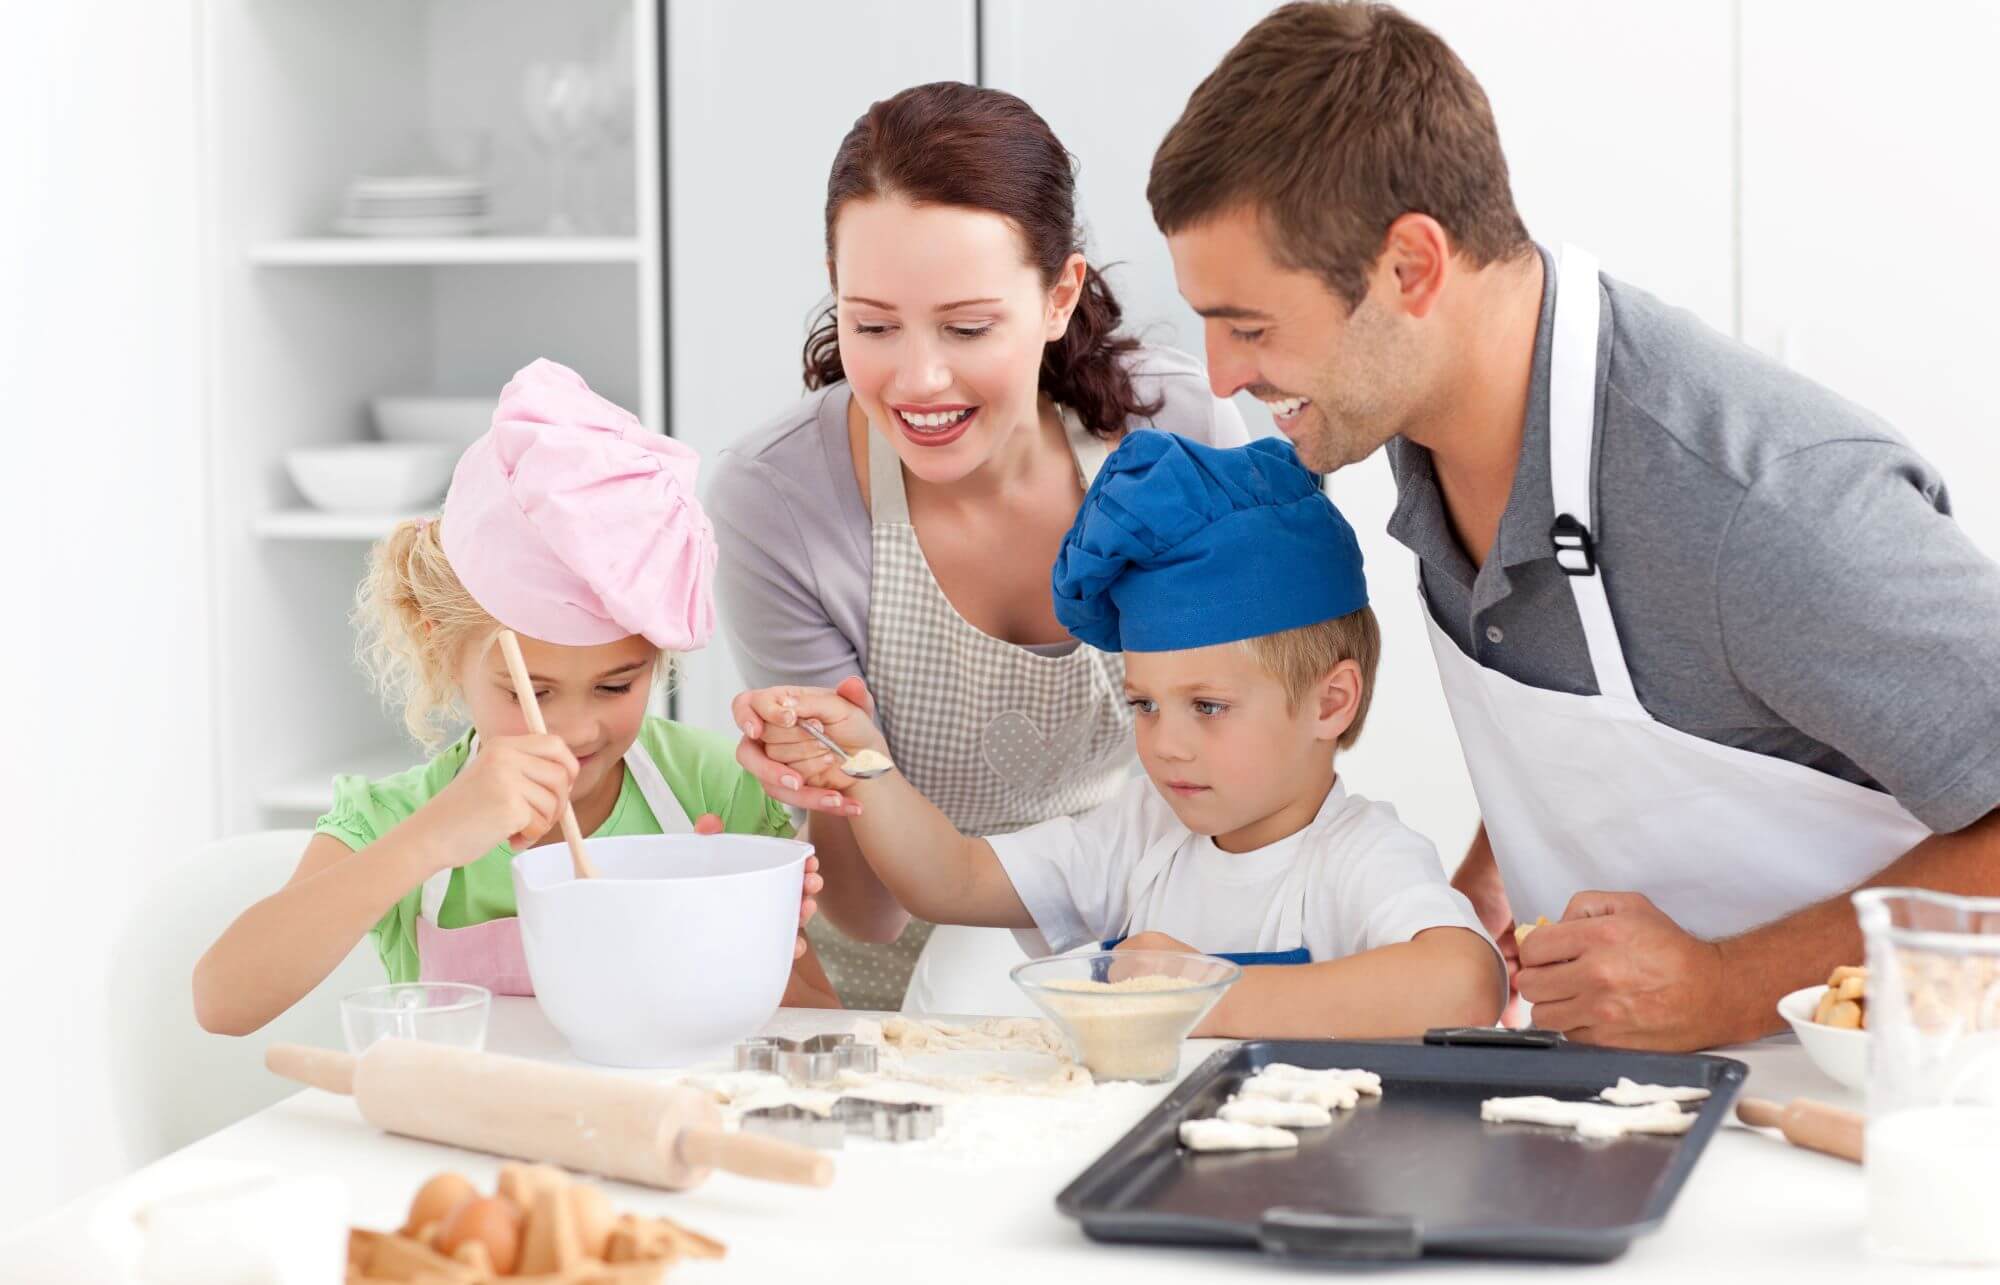 3 tips to get your kids in the kitchen